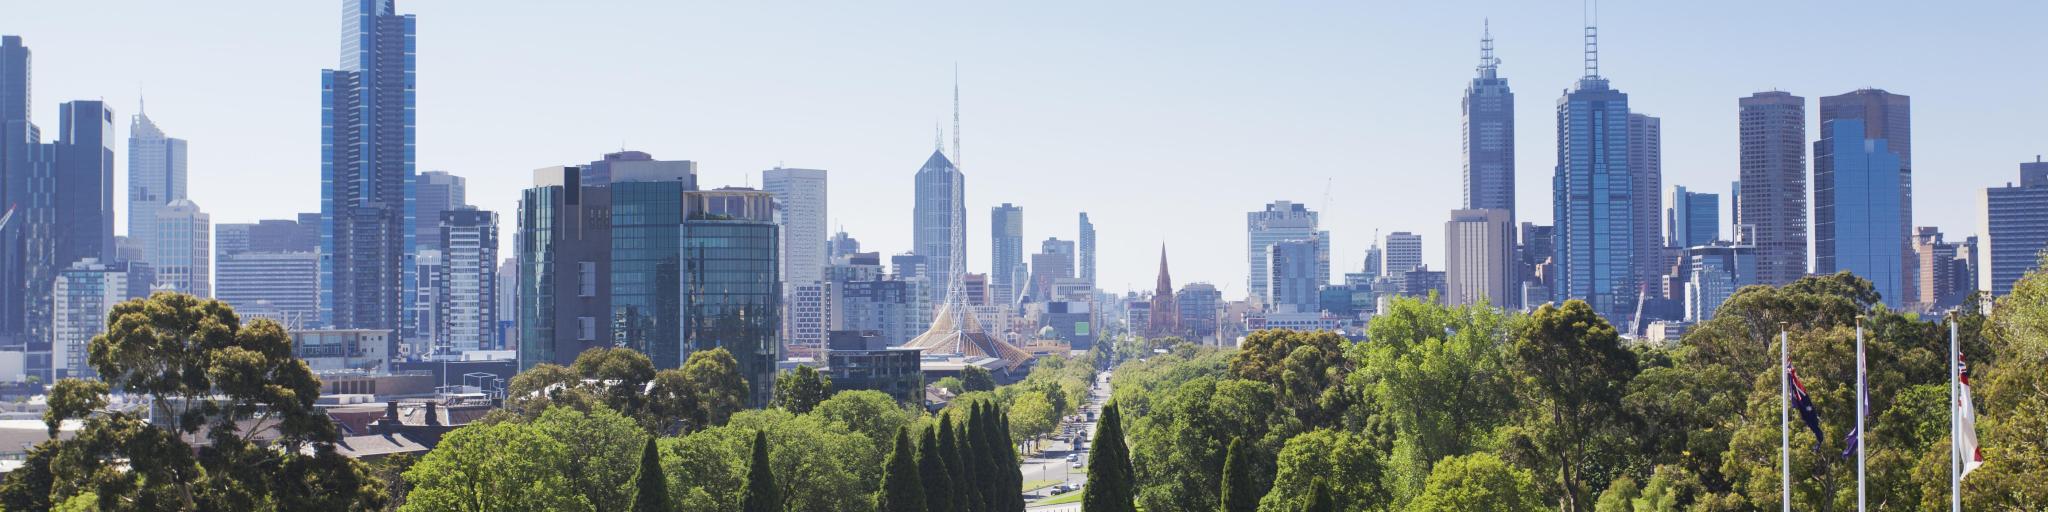 Melbourne, Australia with a view of the skyline on a sunny day.